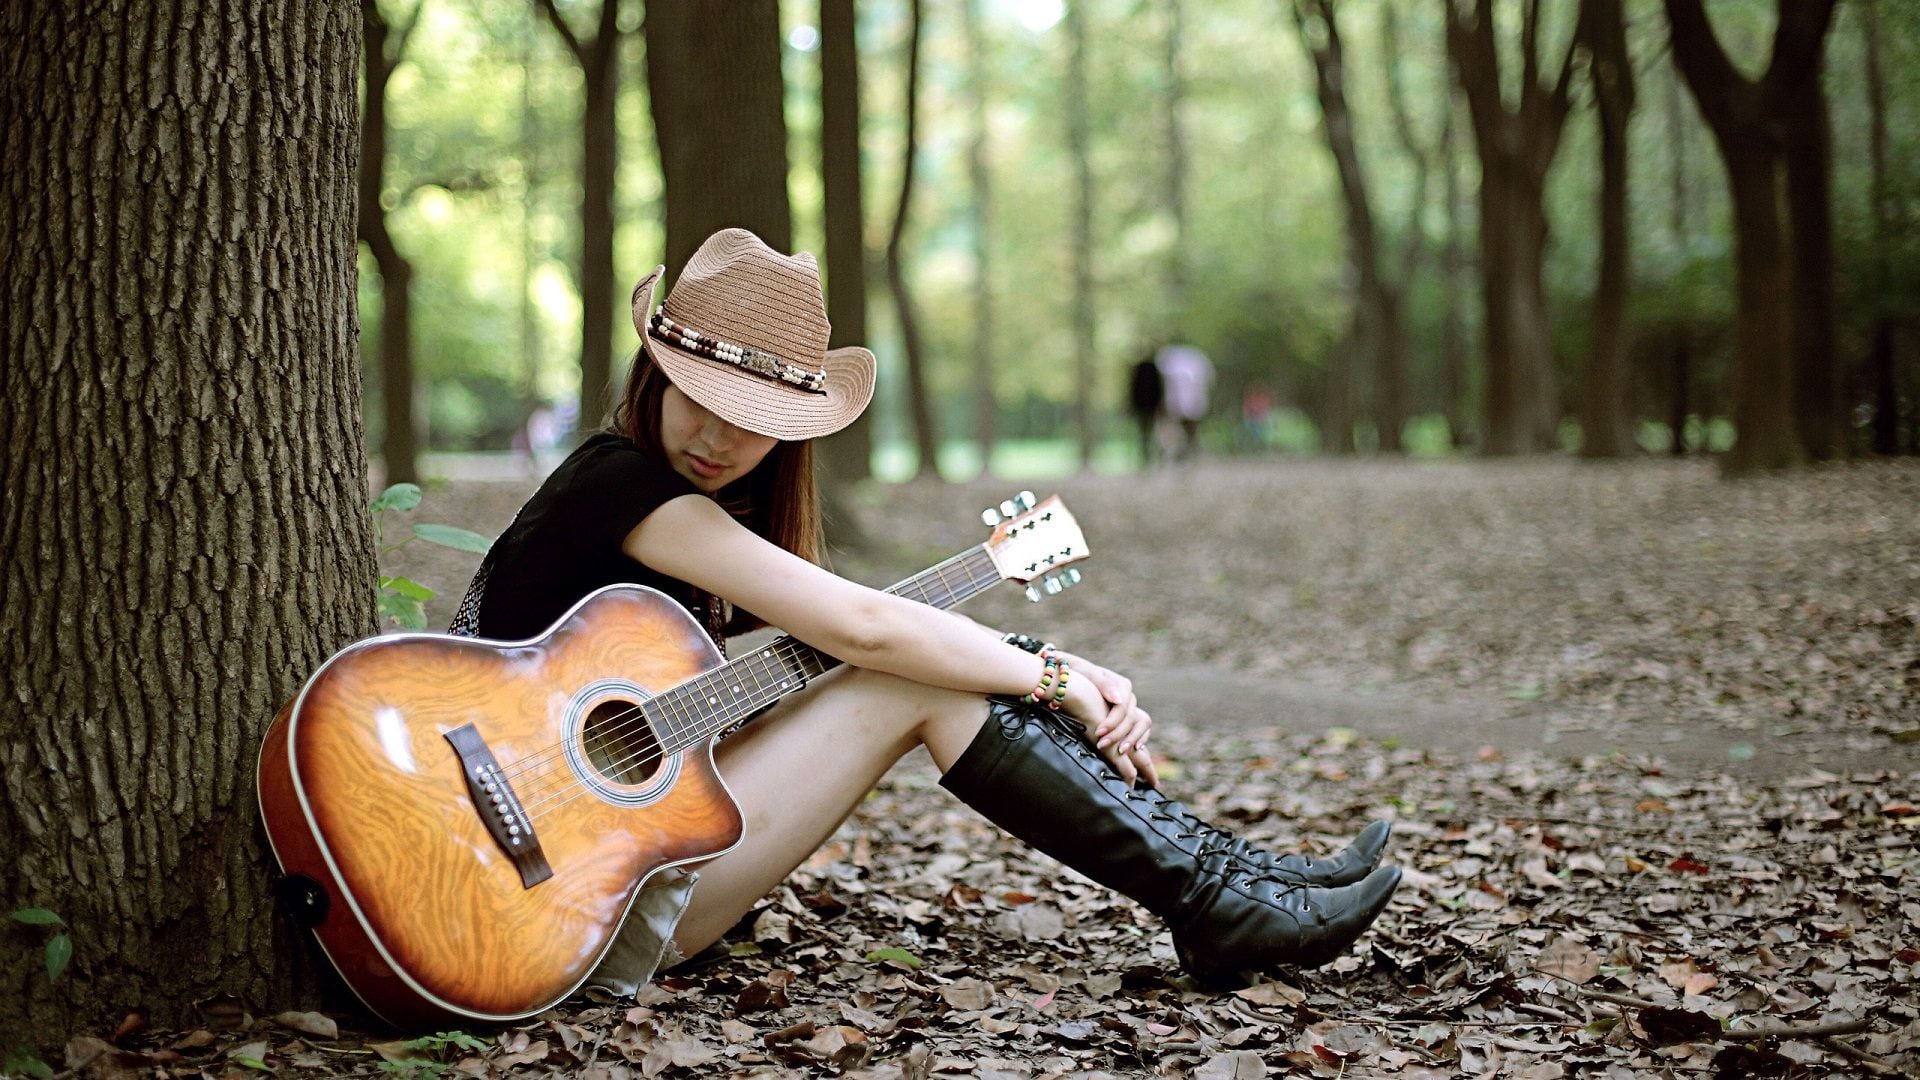 wallpaper of girl with guitar,guitar,string instrument,tree,musician,musical instrument